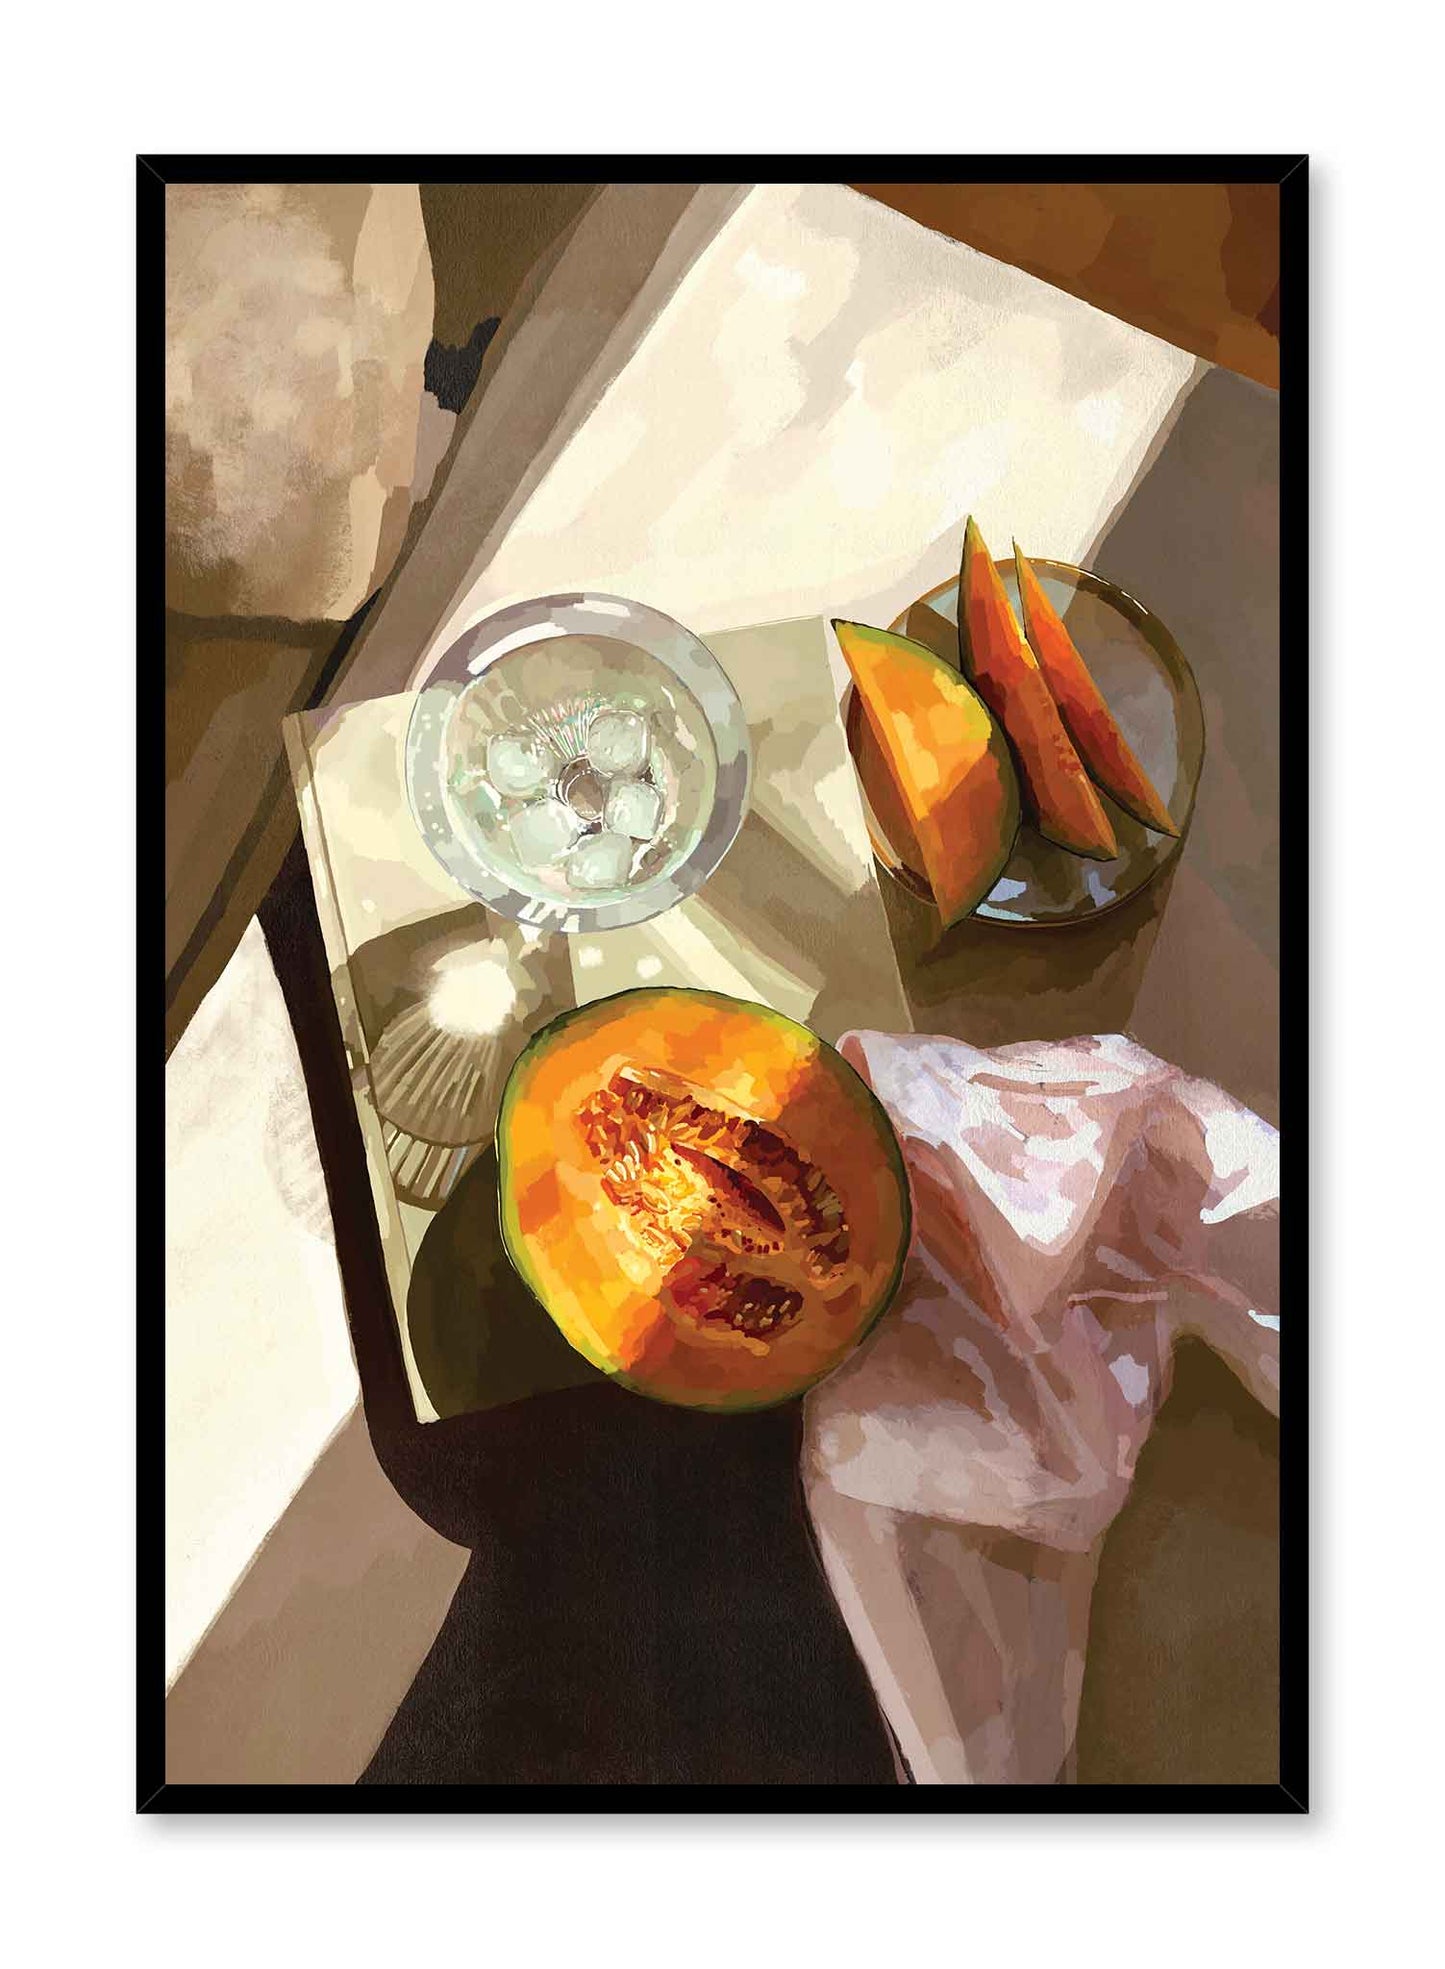 Sweet Cantaloupe is an illustration of a half-cut cantaloupe and a glass of ice water on top of a book by Audrey Rivet in collaboration with Opposite Wall.